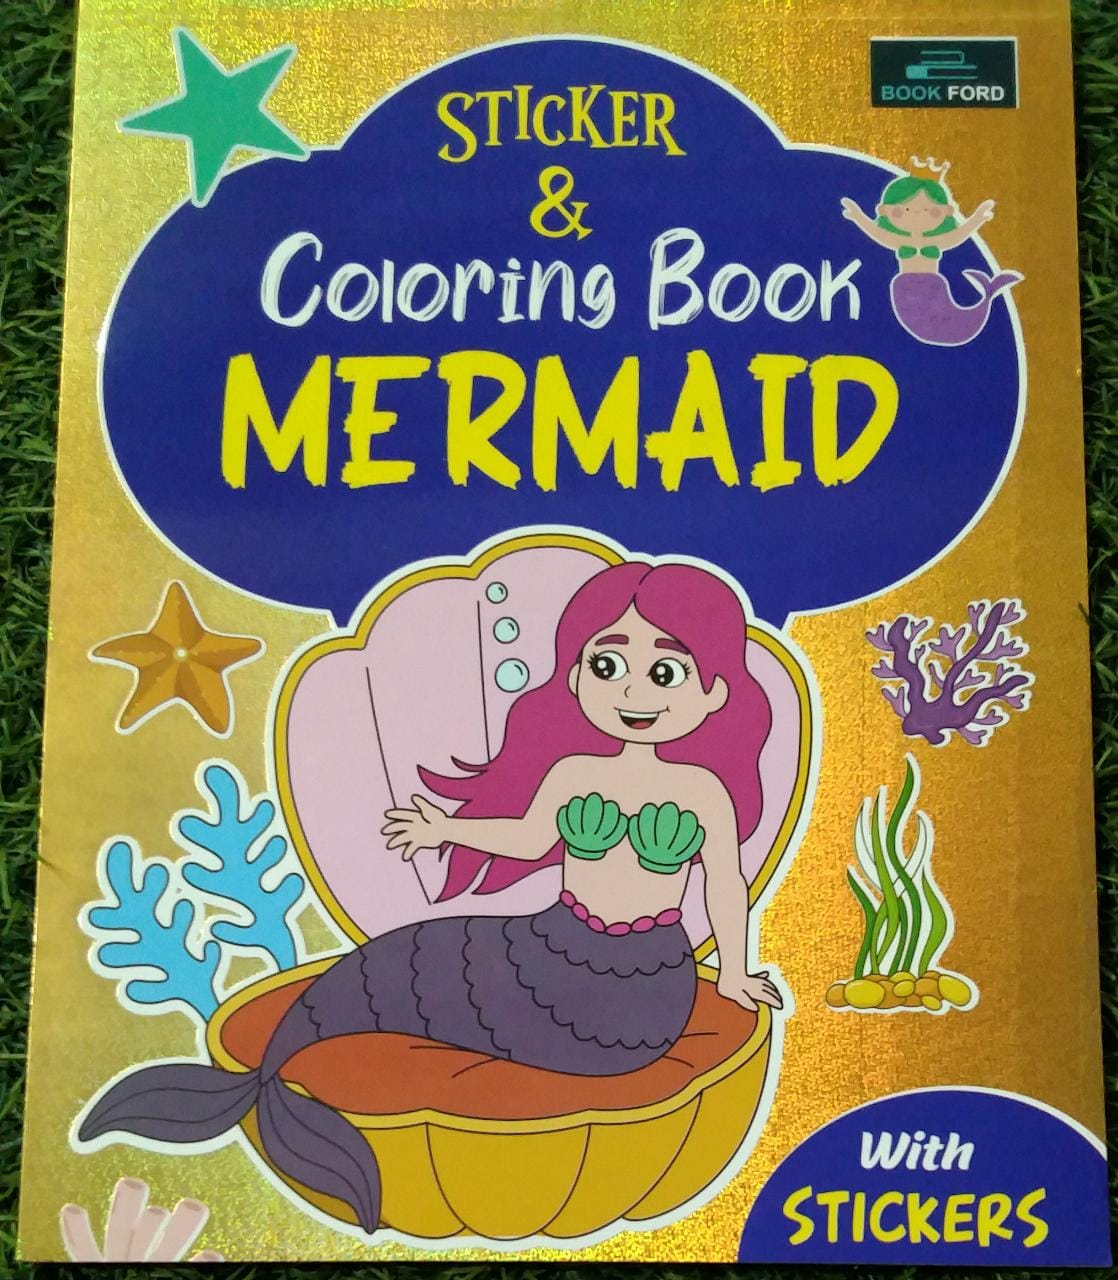 Sticker & Coloring Book Mermaid With Stickers